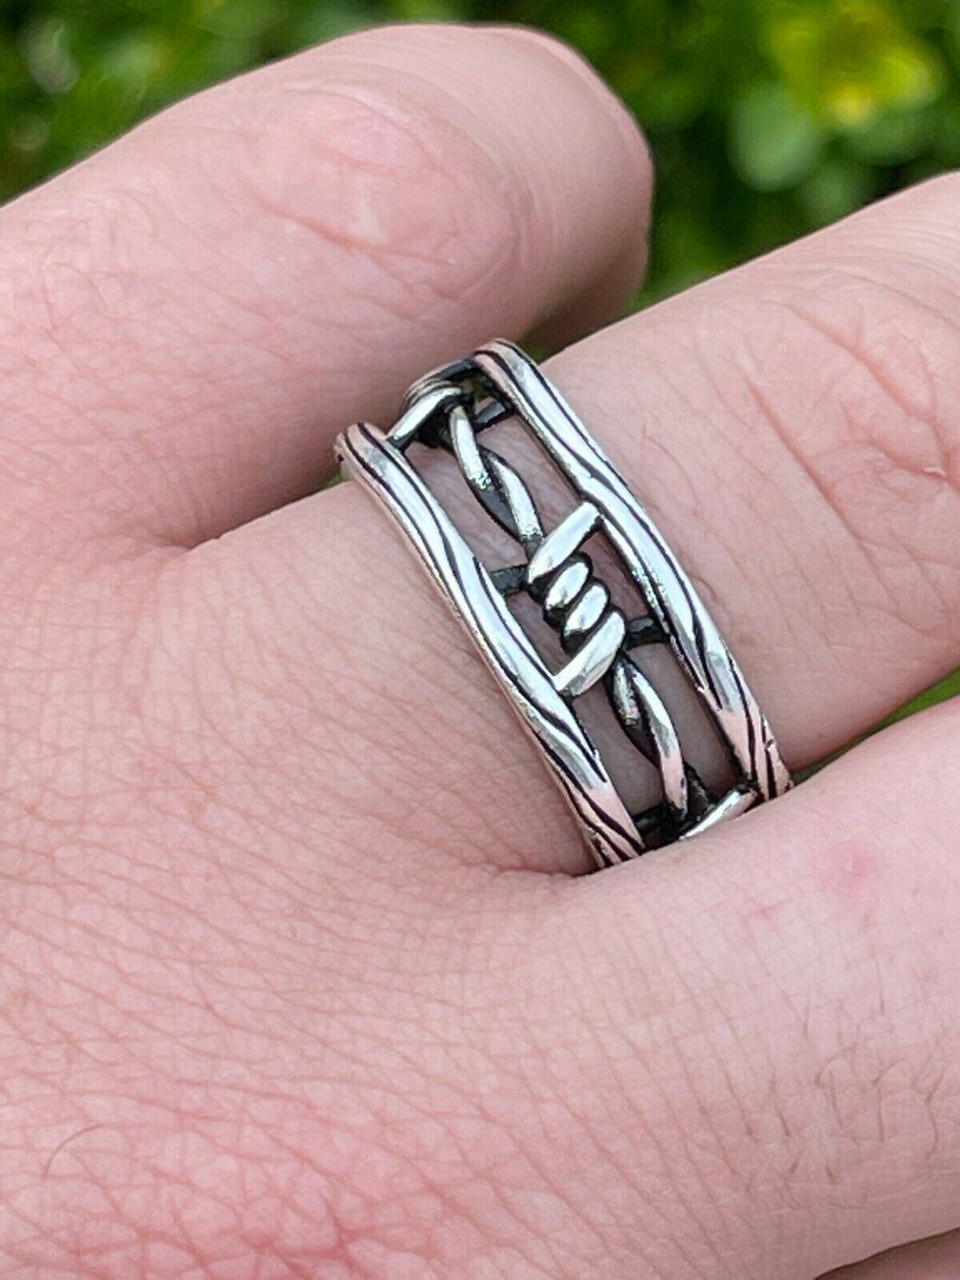 Mens Ring Silver Polished Band Ring Mens Stainless Steel Ring Plain Silver  Ring Men Rings for Men Mens Jewelry by Twistedpendant - Etsy